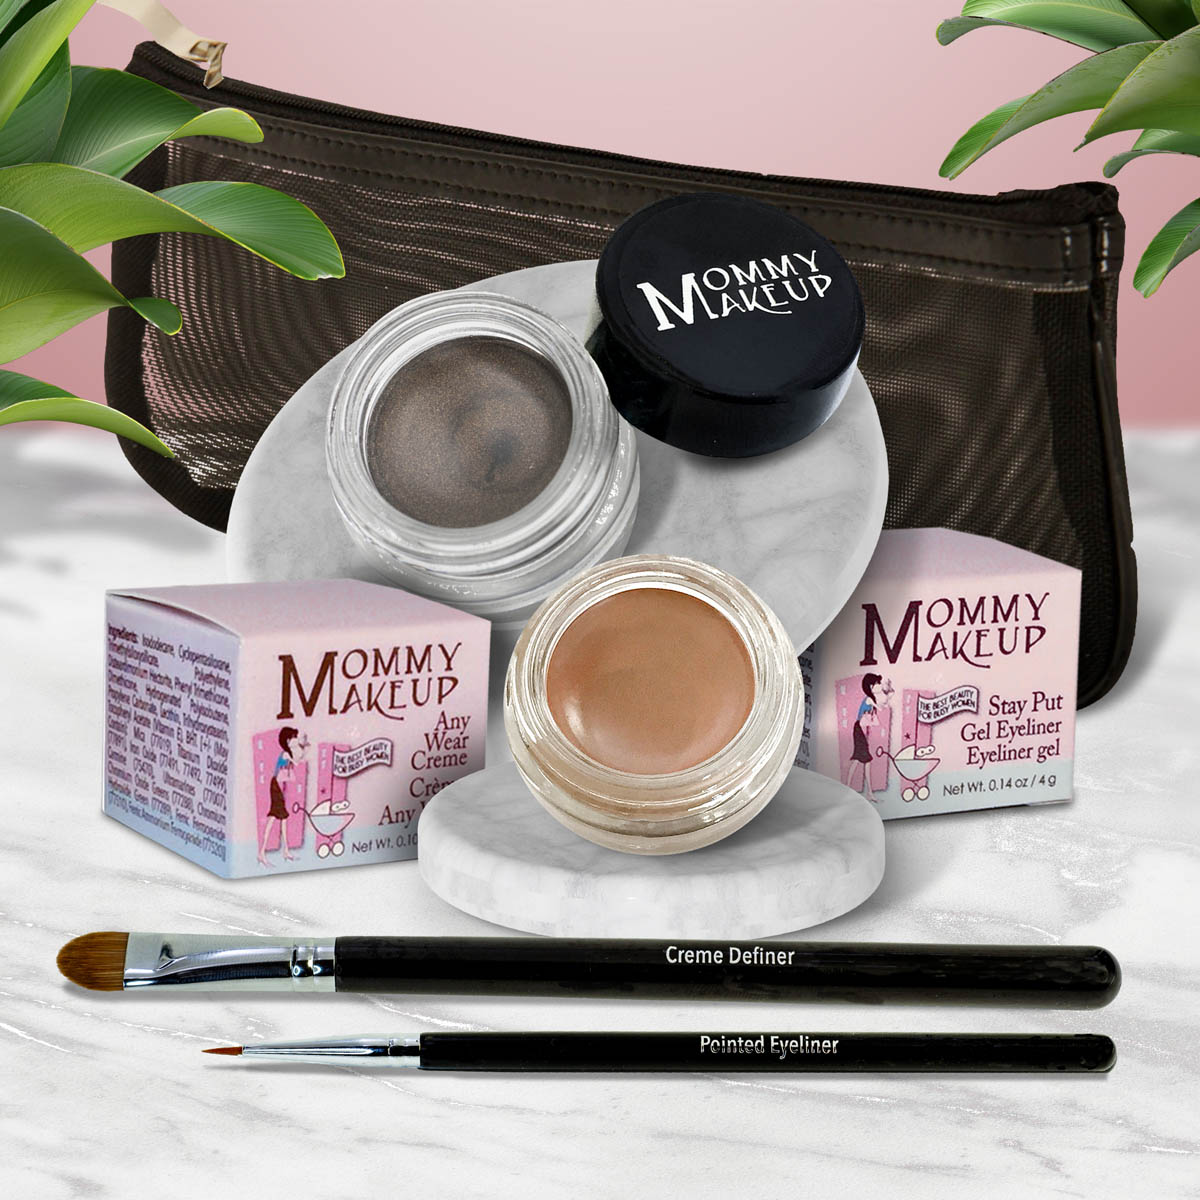 5 piece waterproof eye makeup set. Eyeliner, Eye shadow, brushes. Allergy tested, cruelty free. Made in USA. Misty Mocha - A Matte Cool Mocha Beige and Mischievous - Black with green and gold flecks